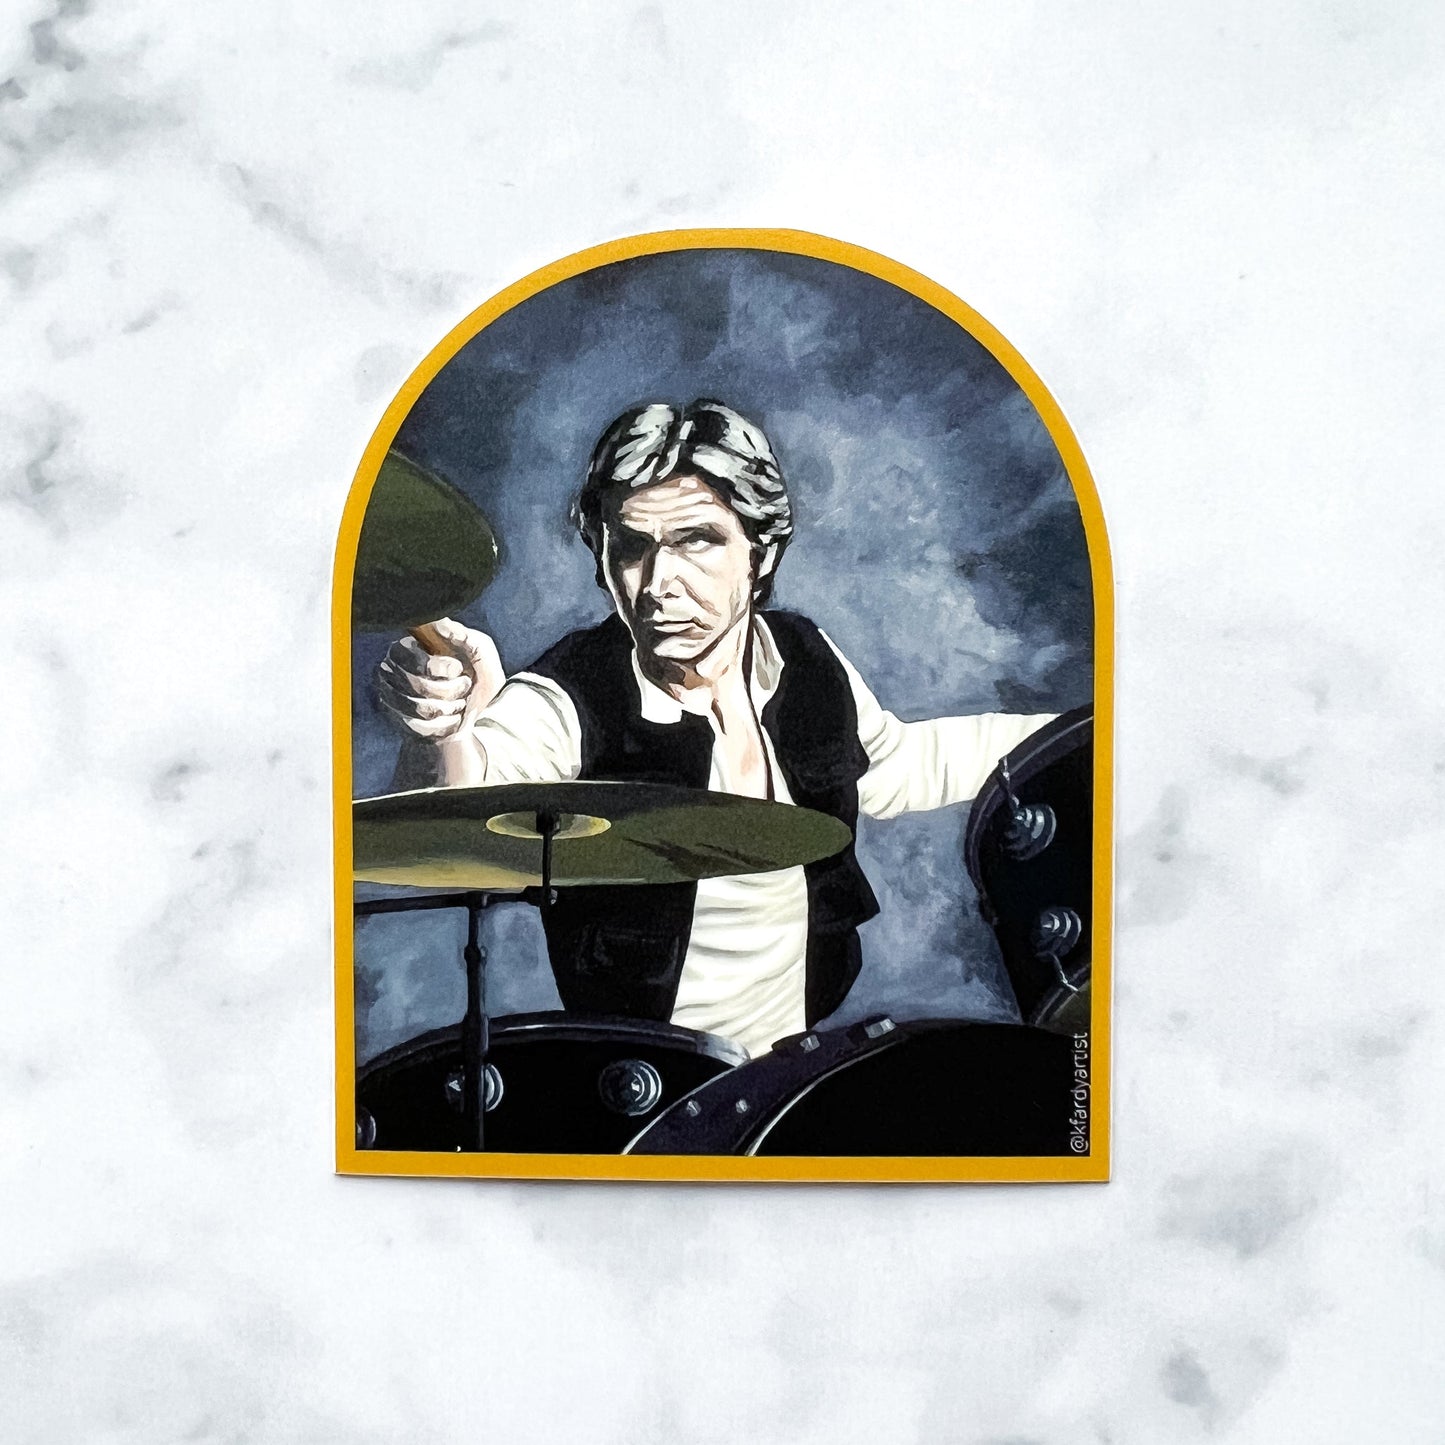 Han Solo Playing the Drums vinyl art sticker